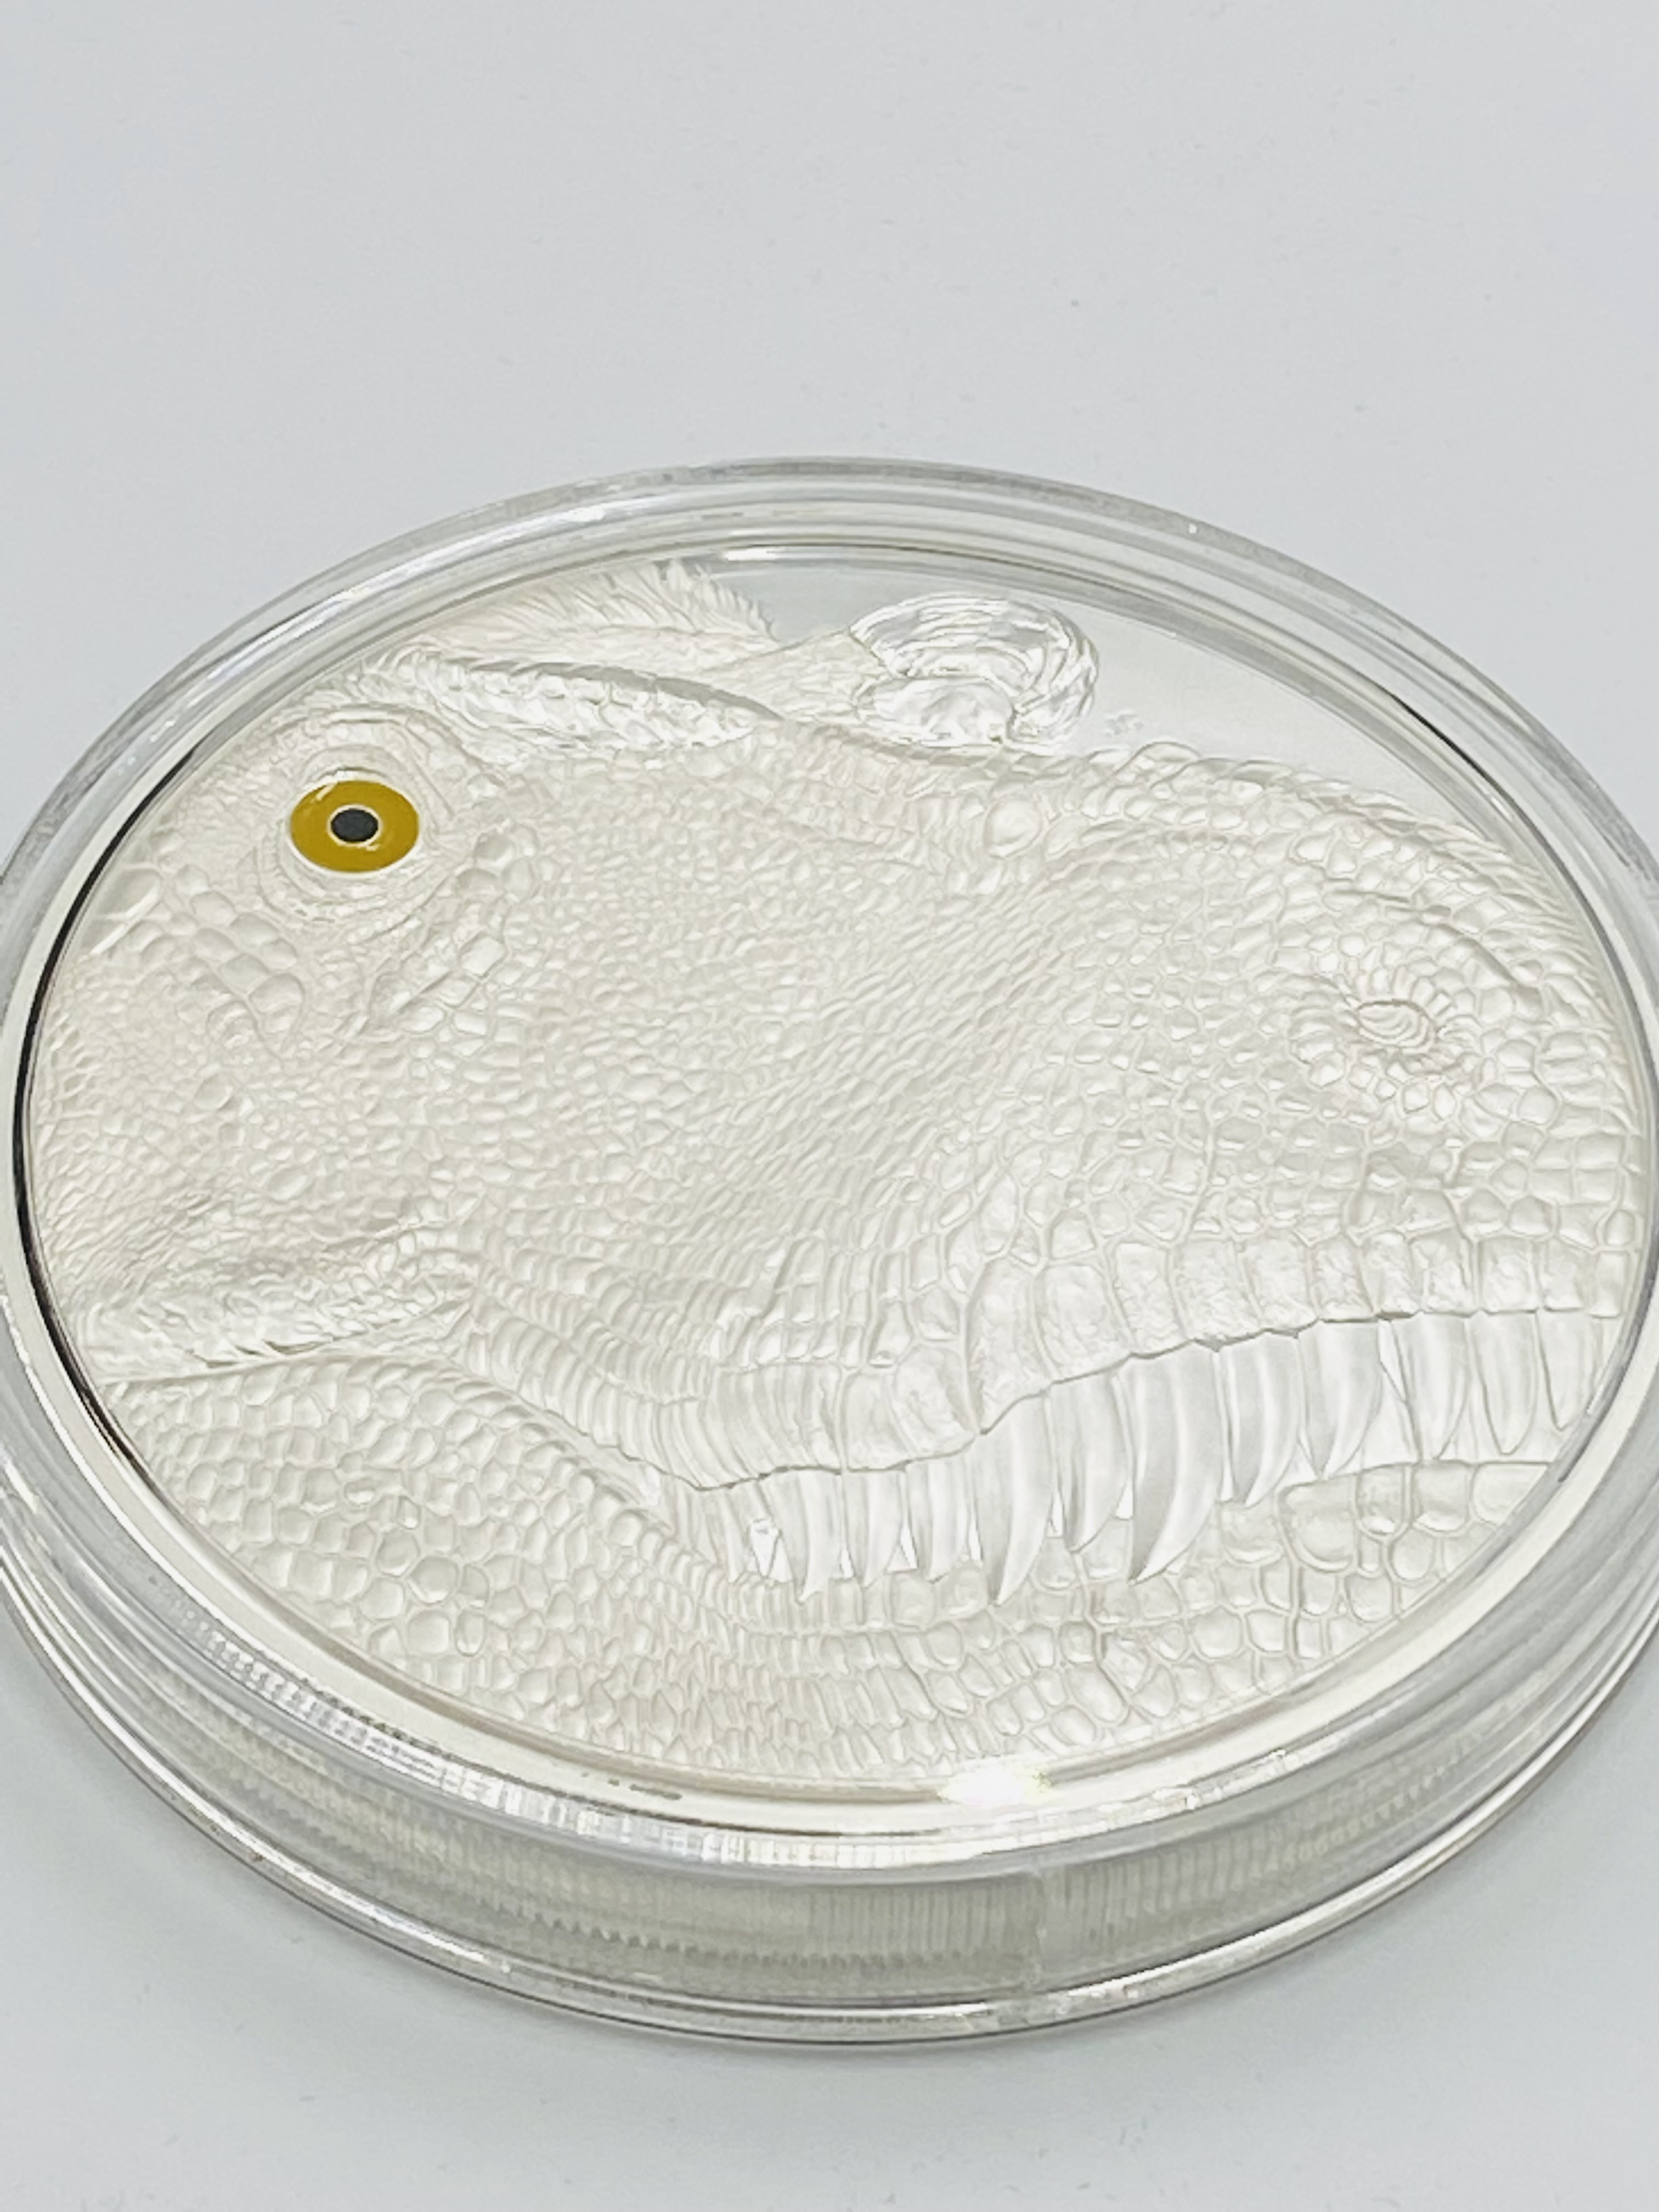 Royal Canadian Mint 2018 $250 1kg silver Tyrannosaurus Rex coin - Image 5 of 5